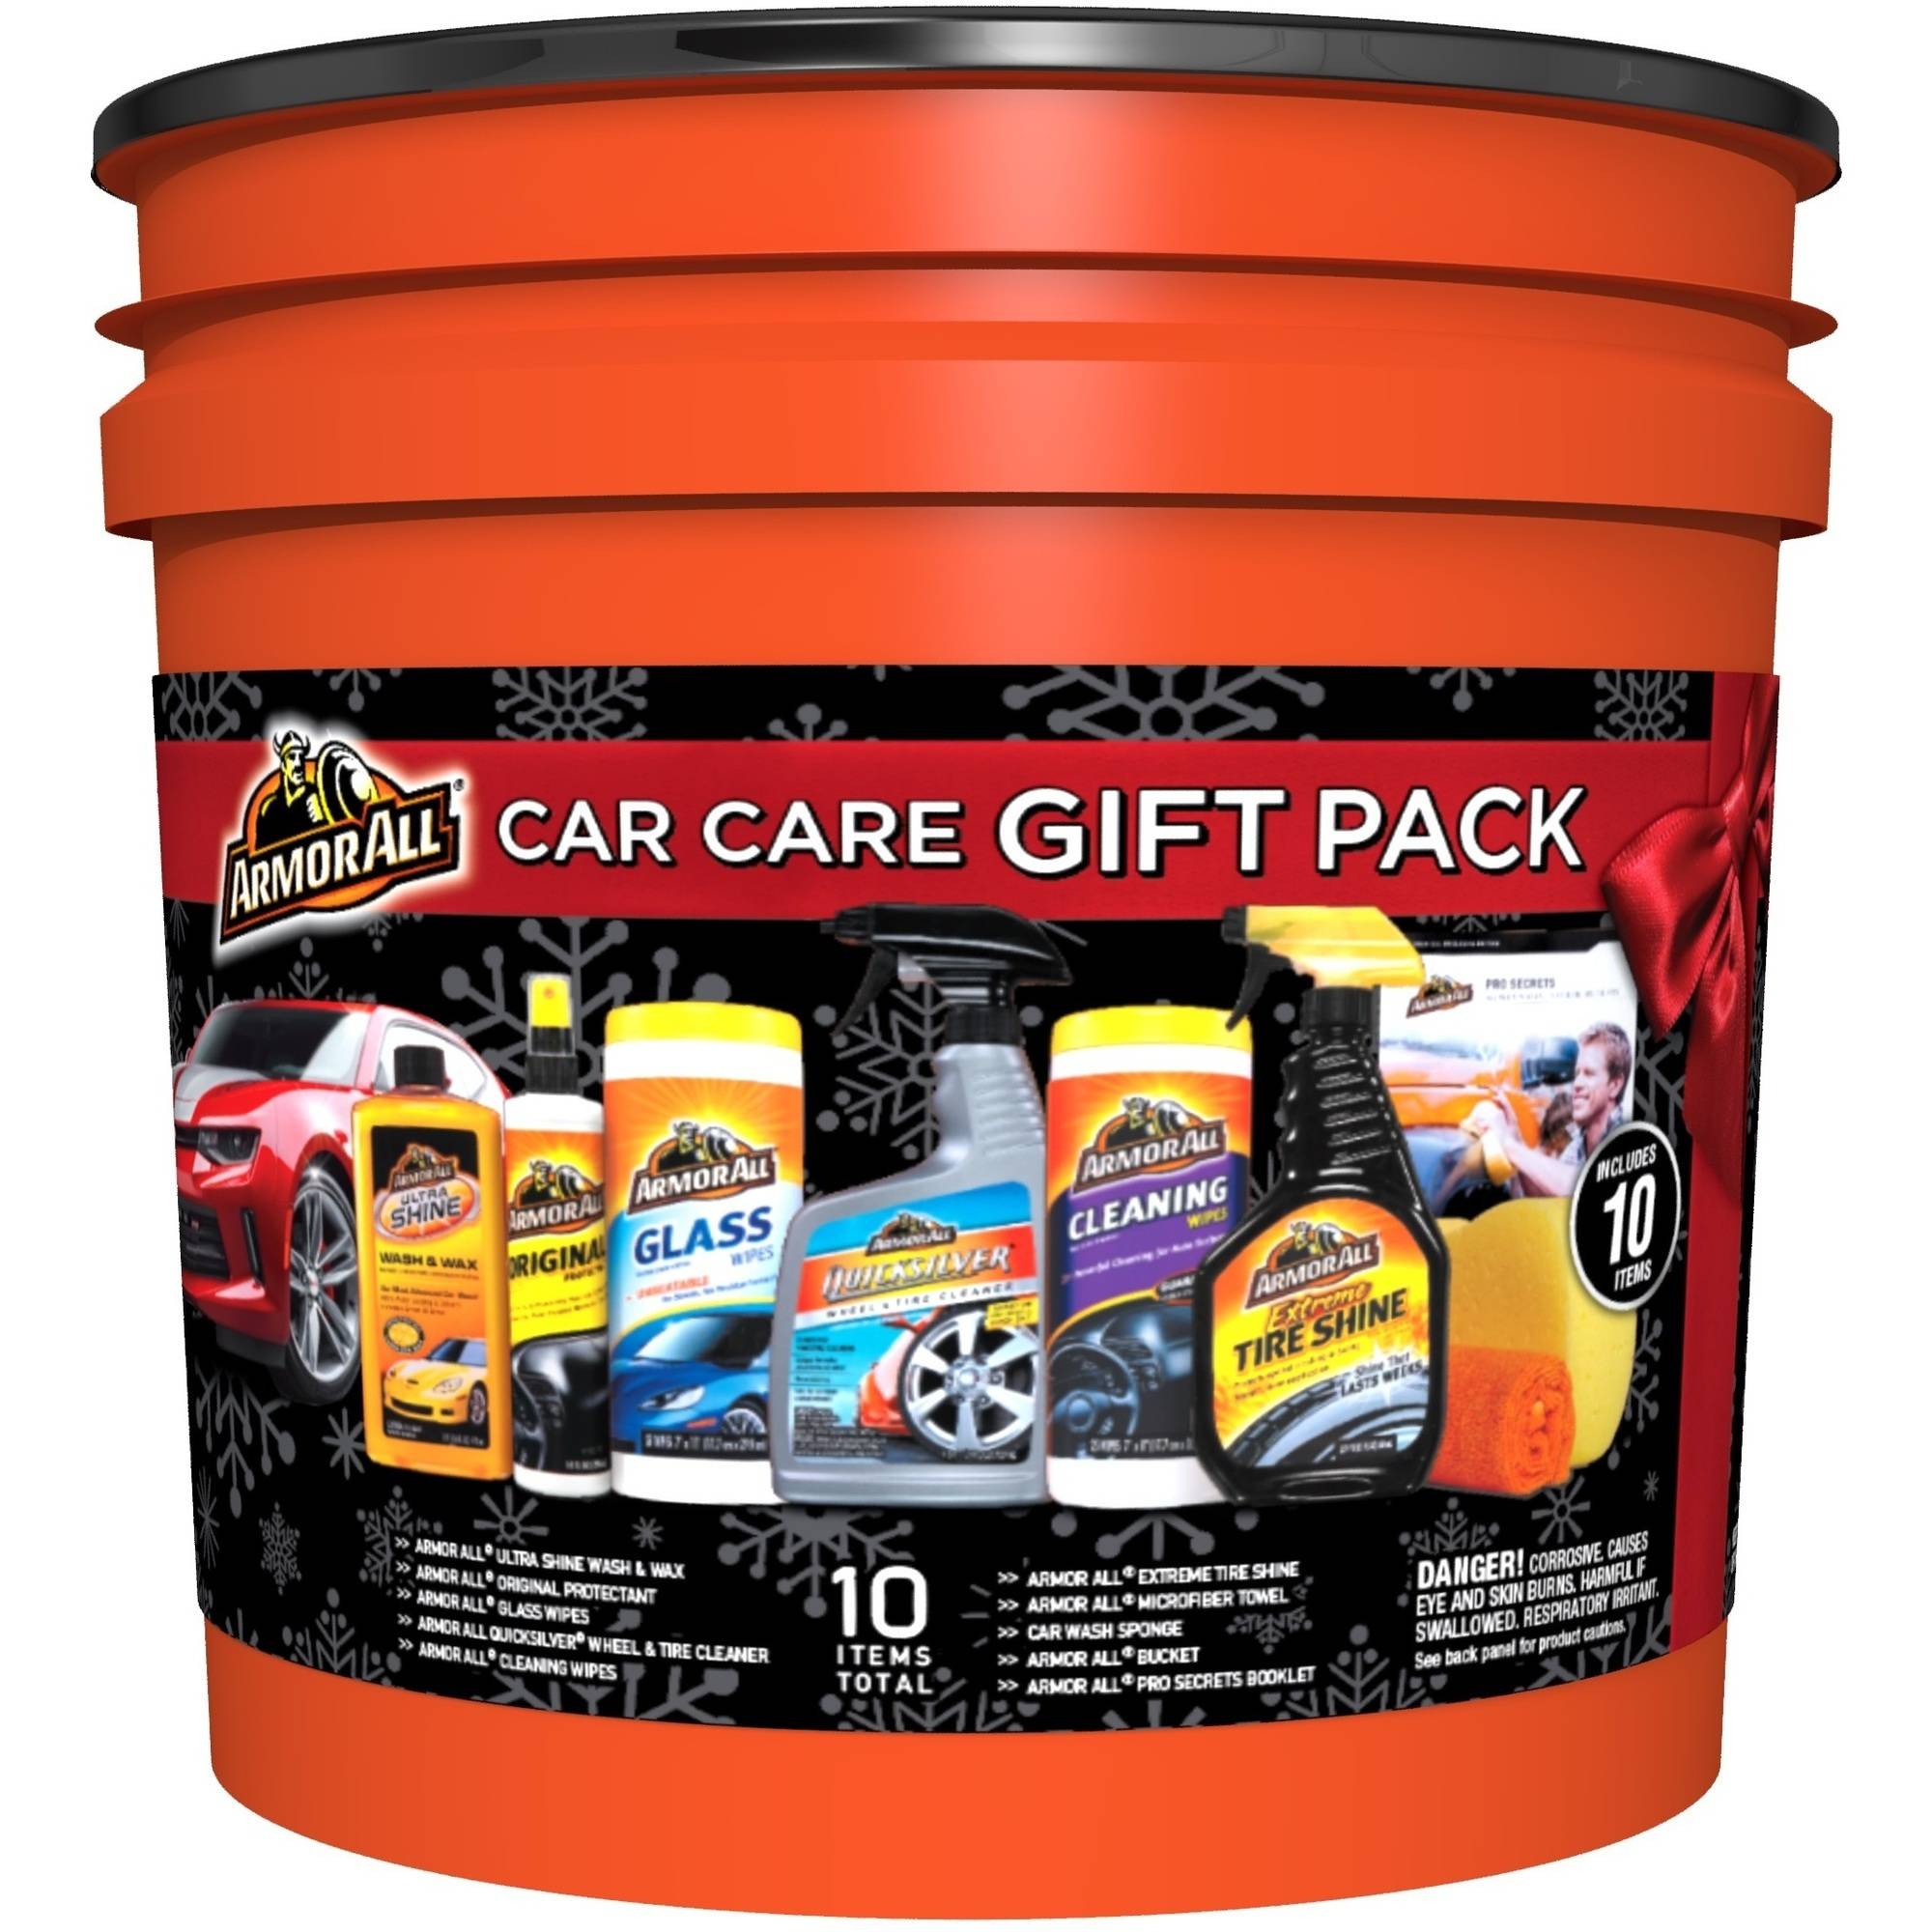 Armor All Car Care Gift Pack 10pc Bucket - image 1 of 2